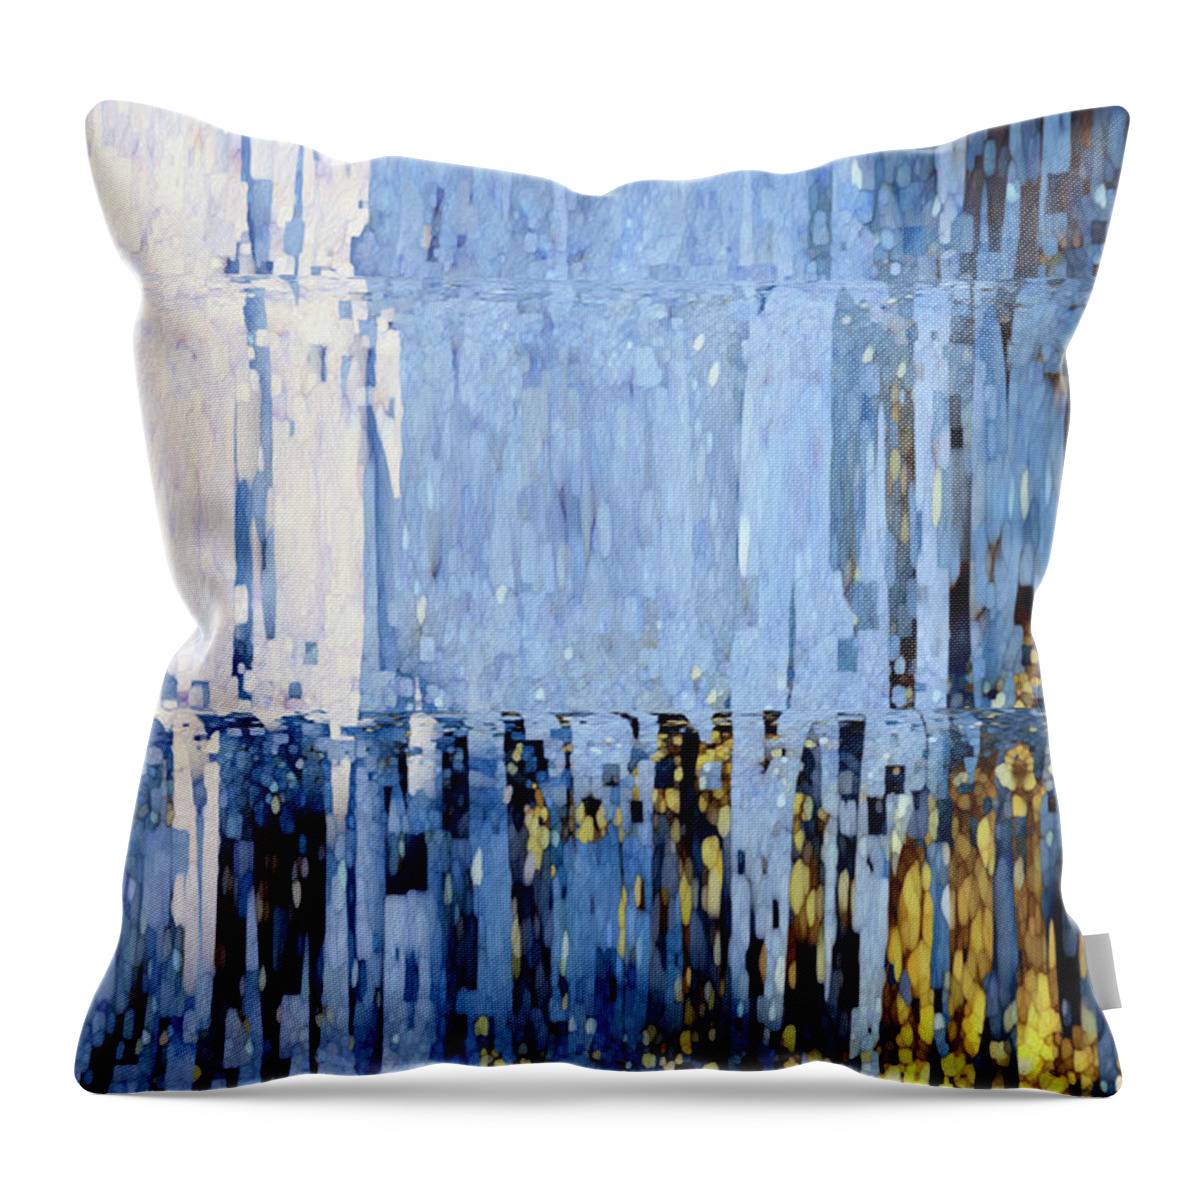 Geometric Throw Pillow featuring the painting Psalm 23 1. My Shepherd. by Mark Lawrence